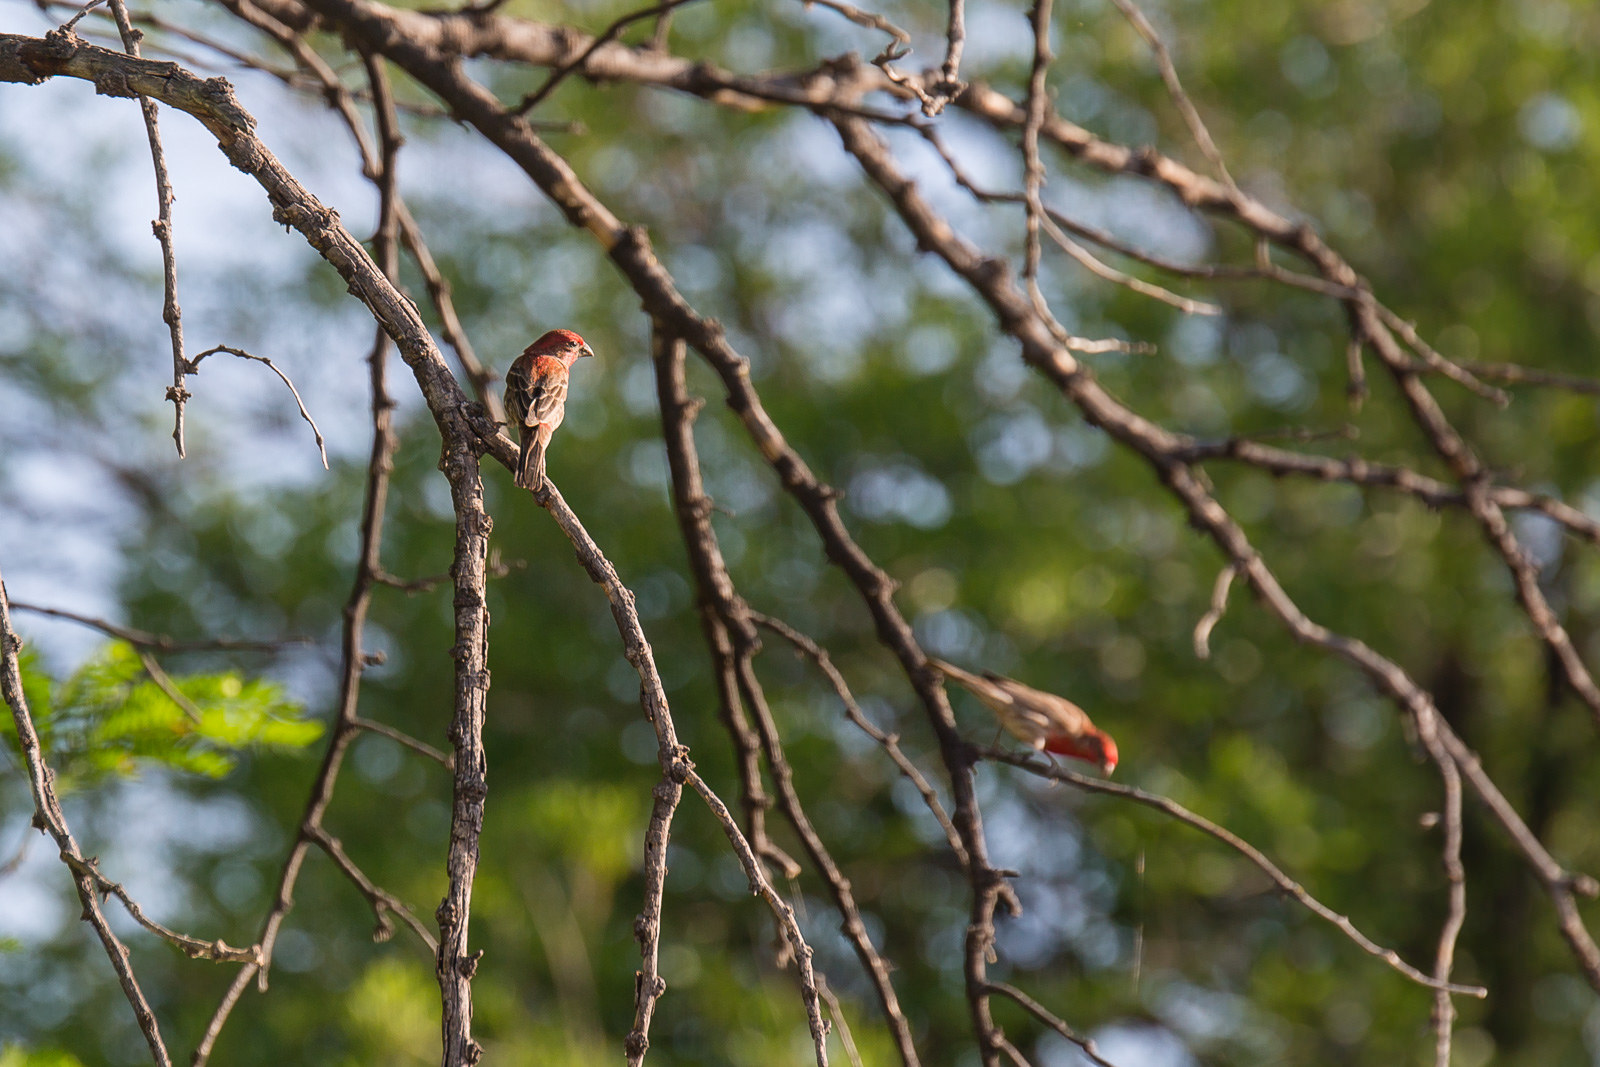 House finches in Big Bend